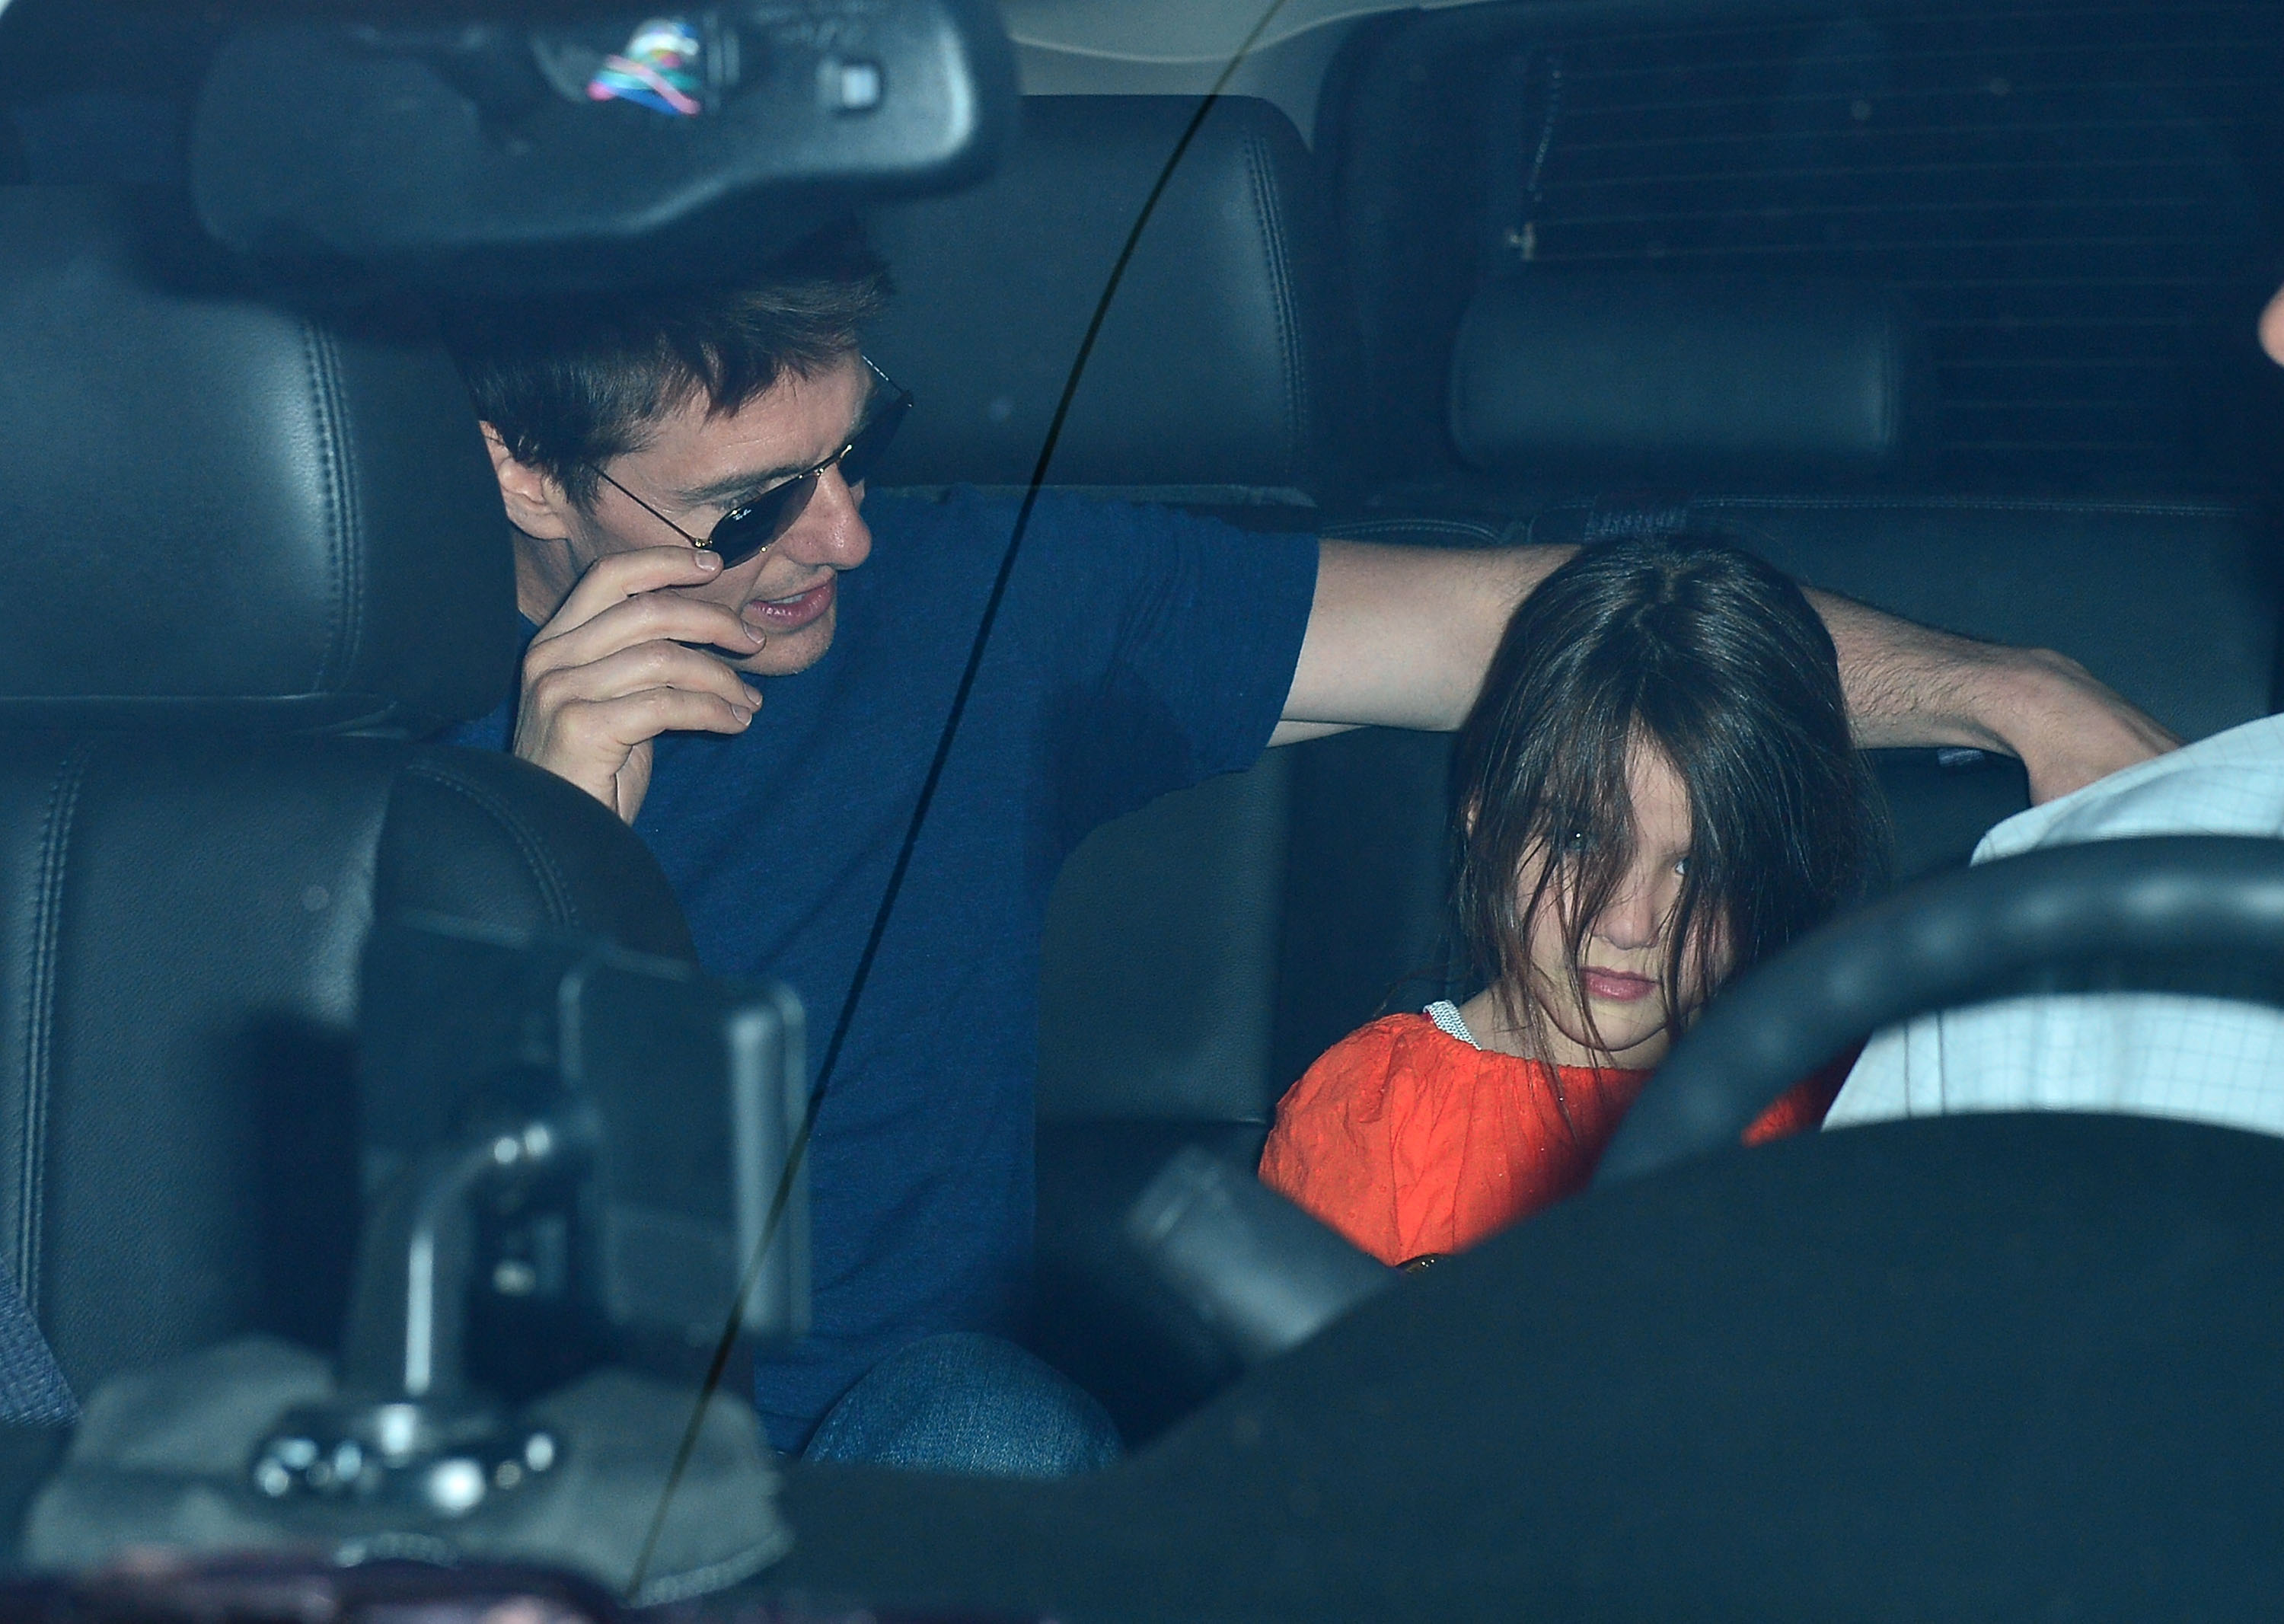  Tom Cruise and Suri Cruise on July 17, 2012 in New York City | Source: Getty Images